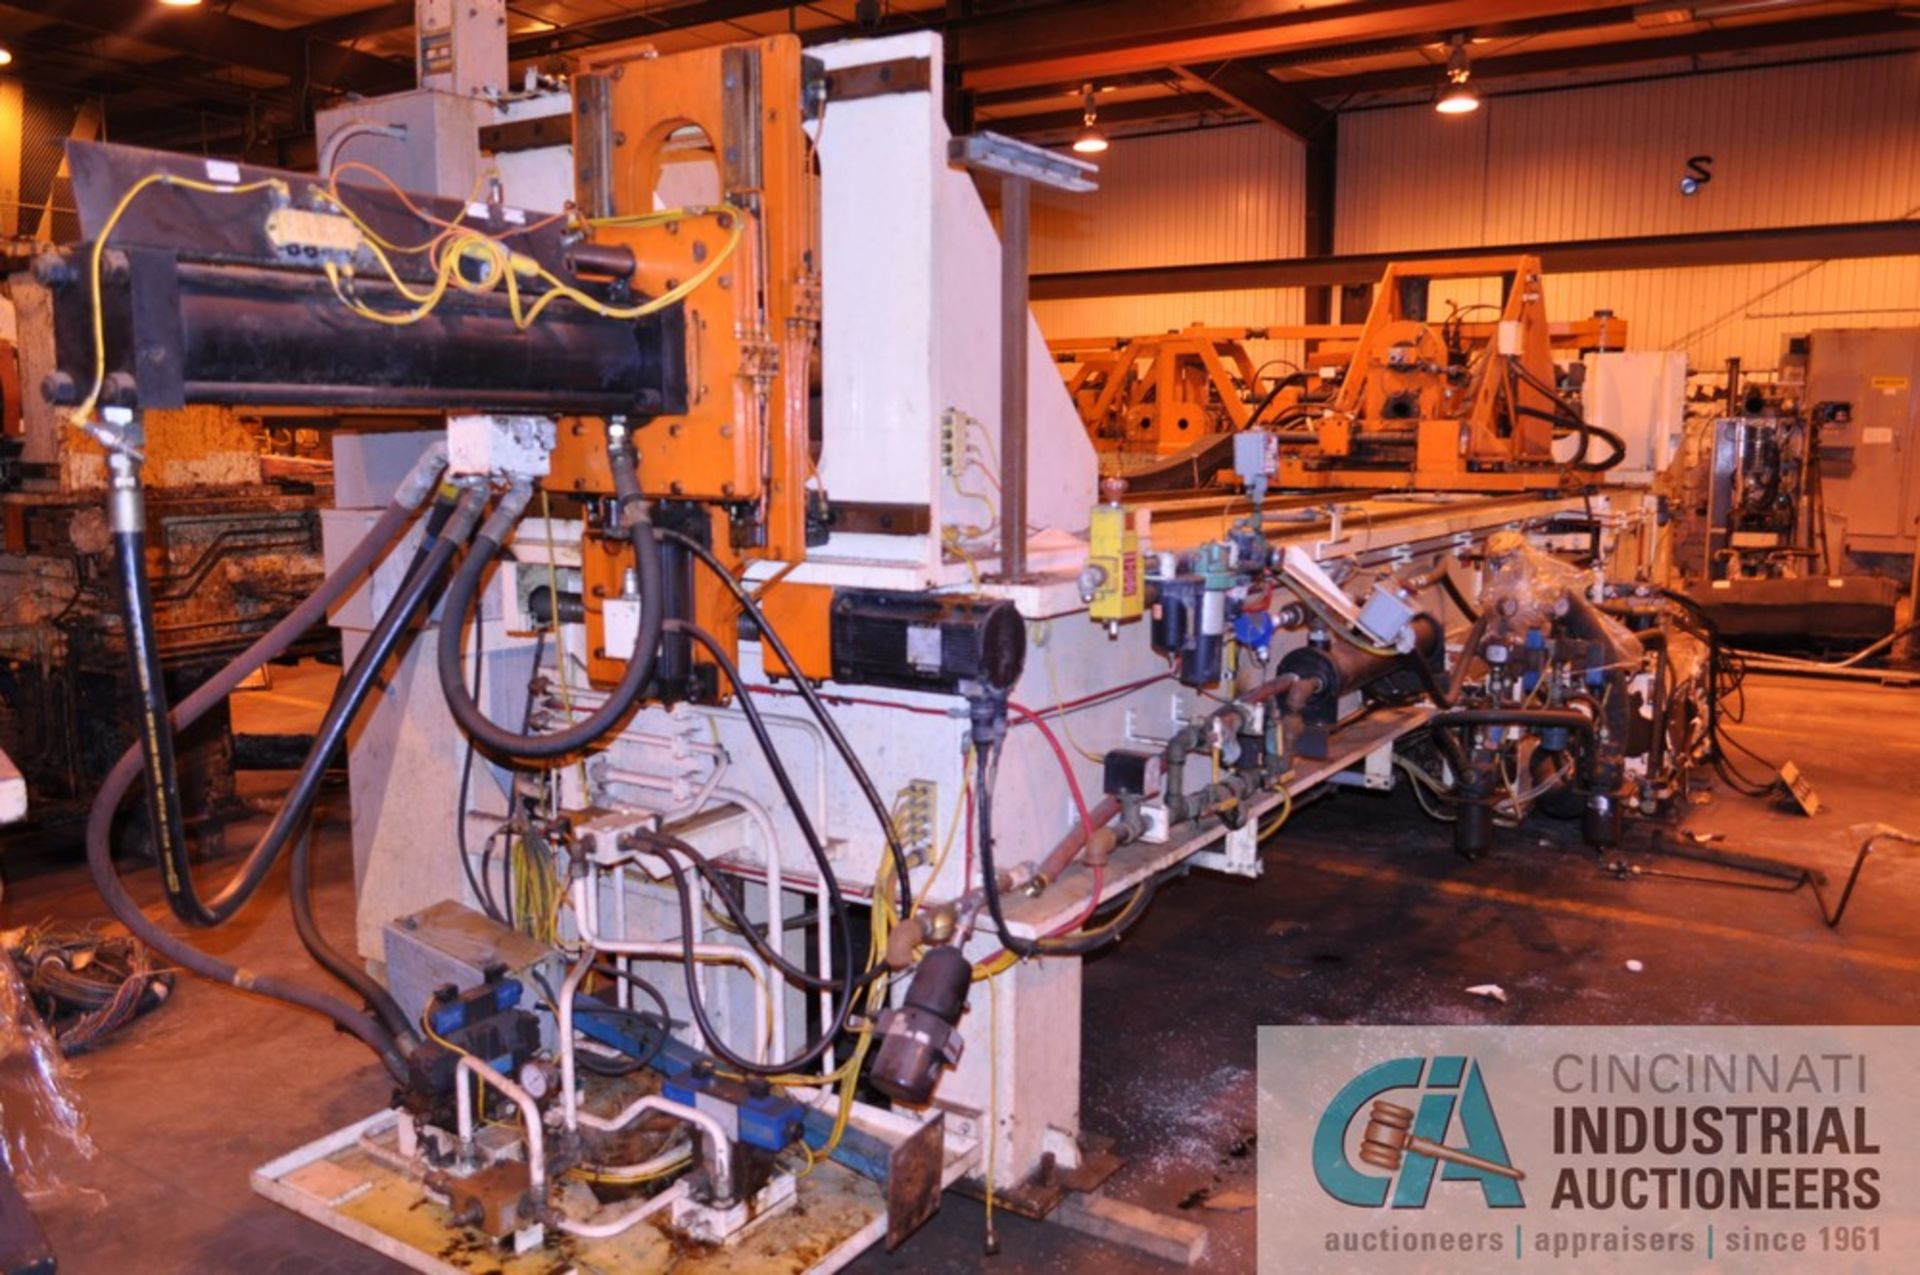 6" EAGLE EPT-150 CNC HYDRAULIC TUBE BENDER; S/N 96-979, DOUBLE STACKING TOOLS, .170" MAX WALL, 6" - Image 4 of 11